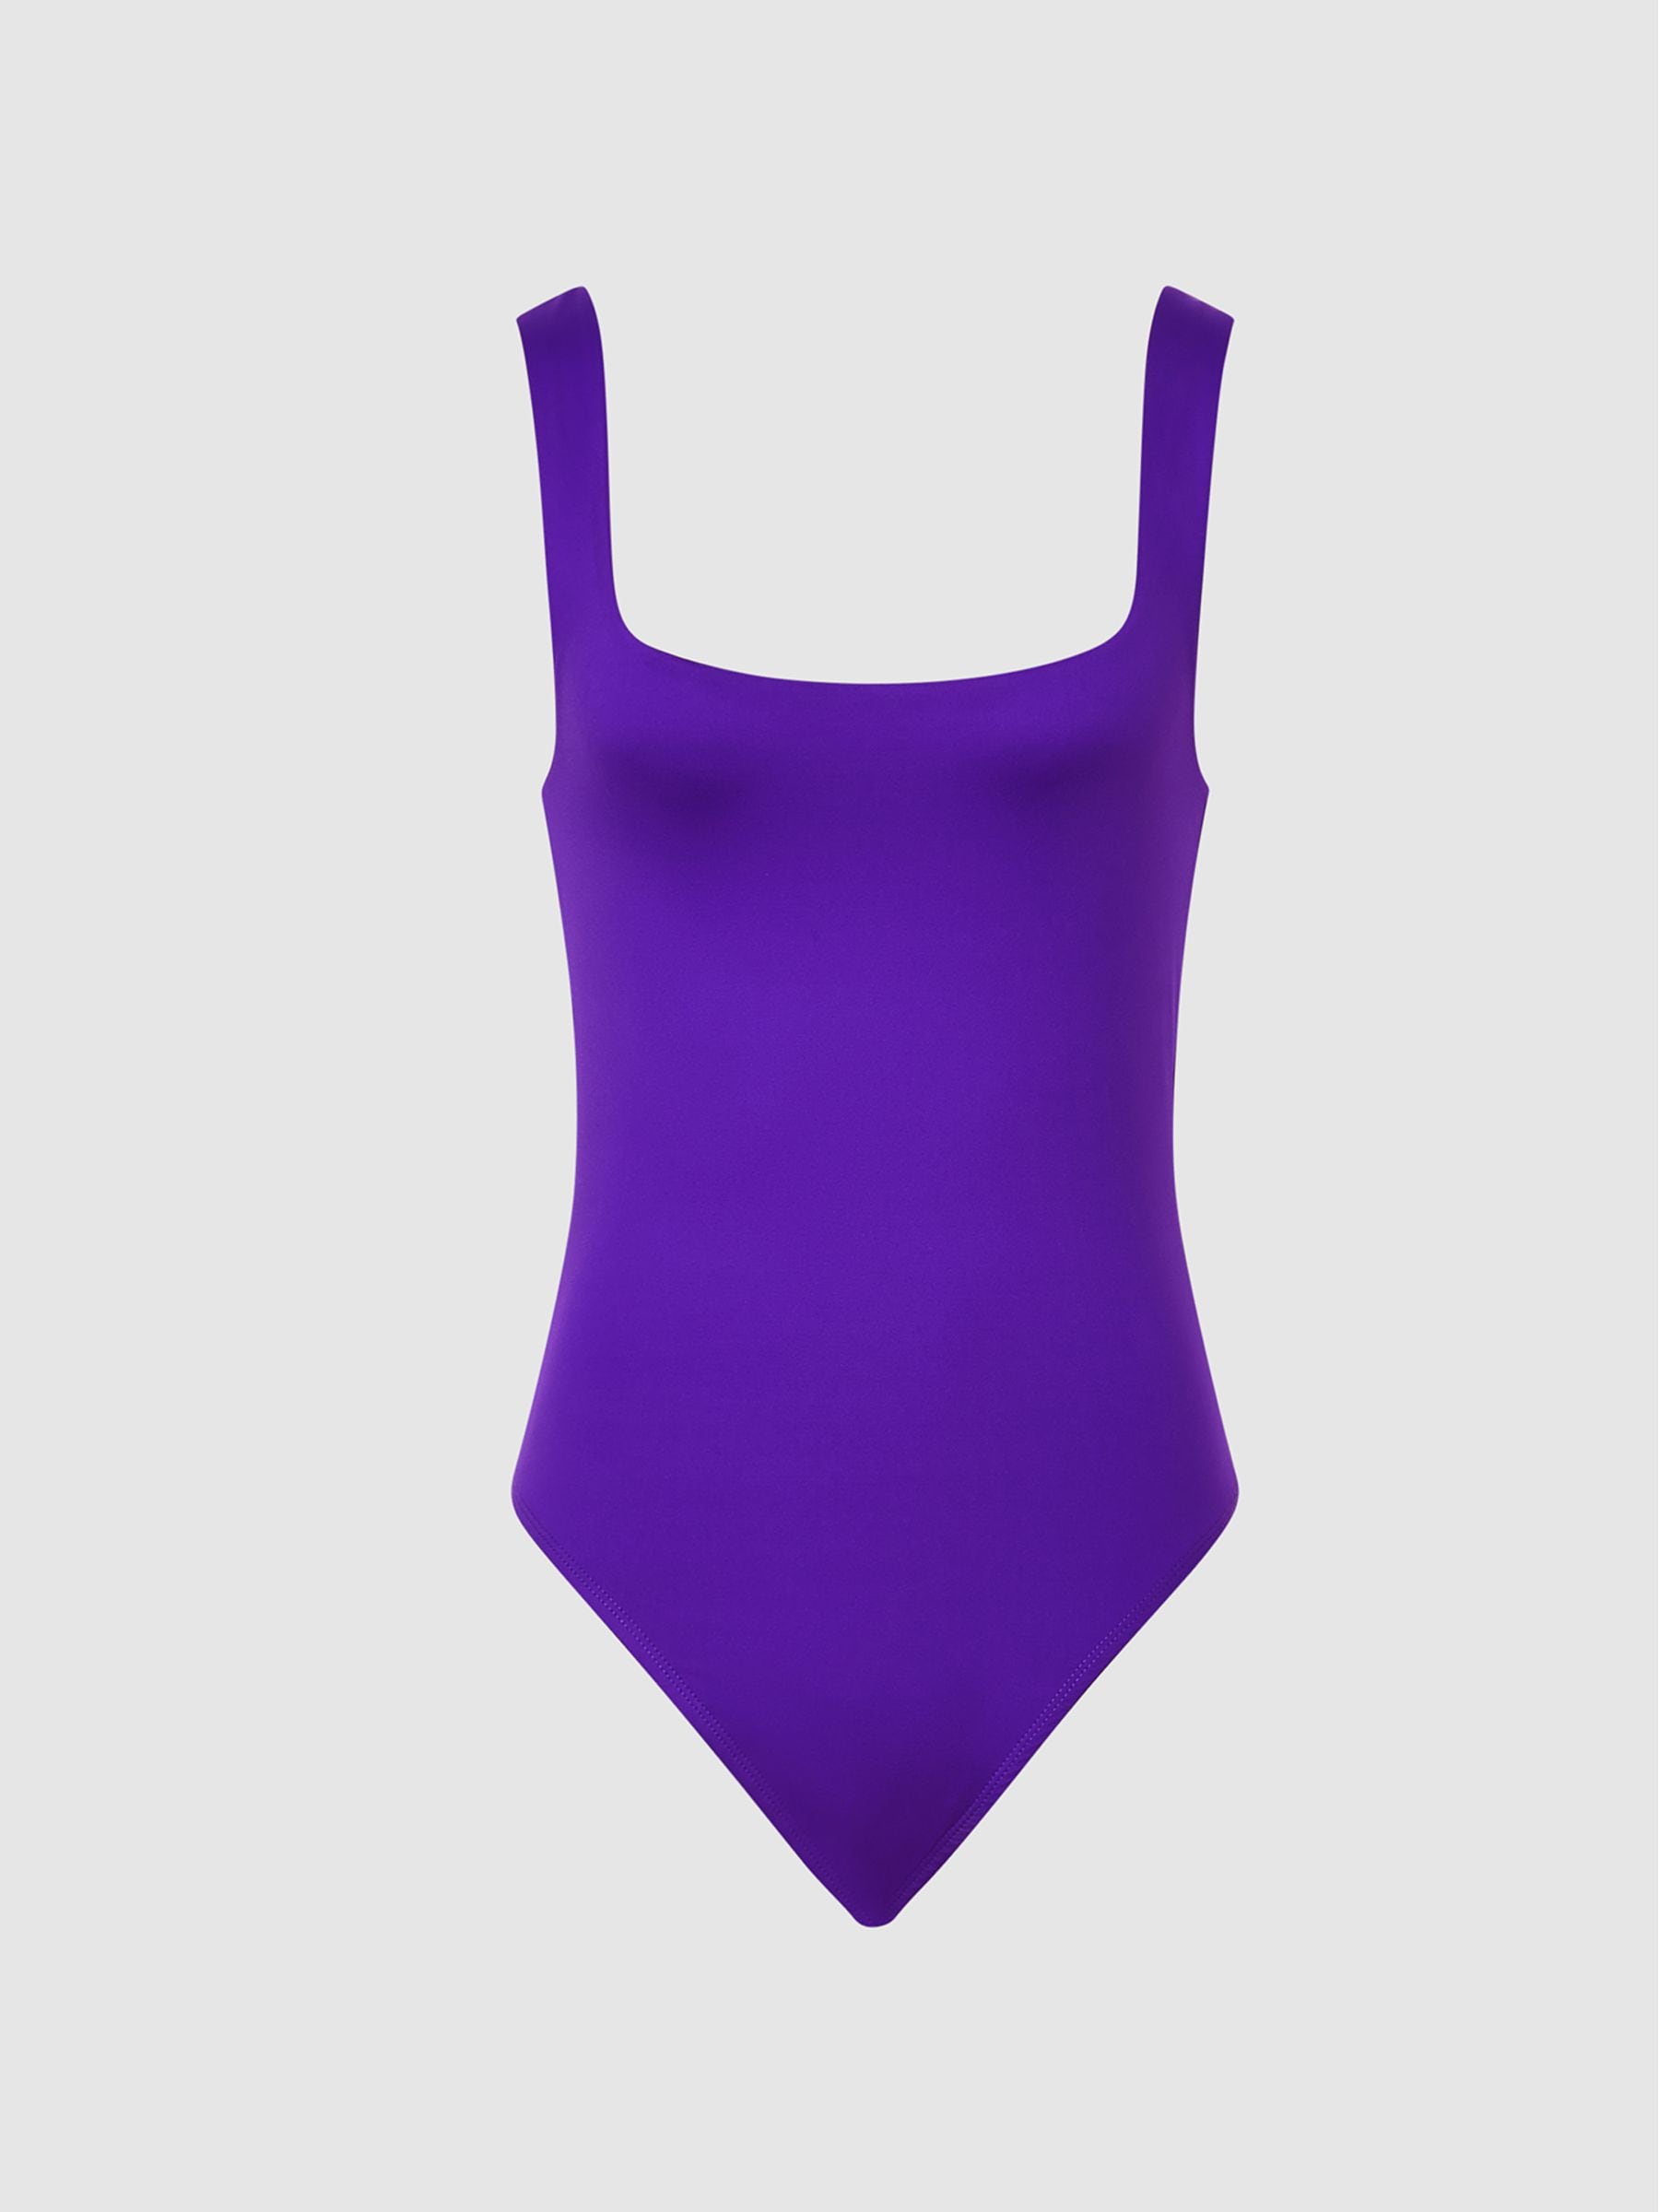 Reiss Laurie Square Neck Jersey Body | REISS Australia